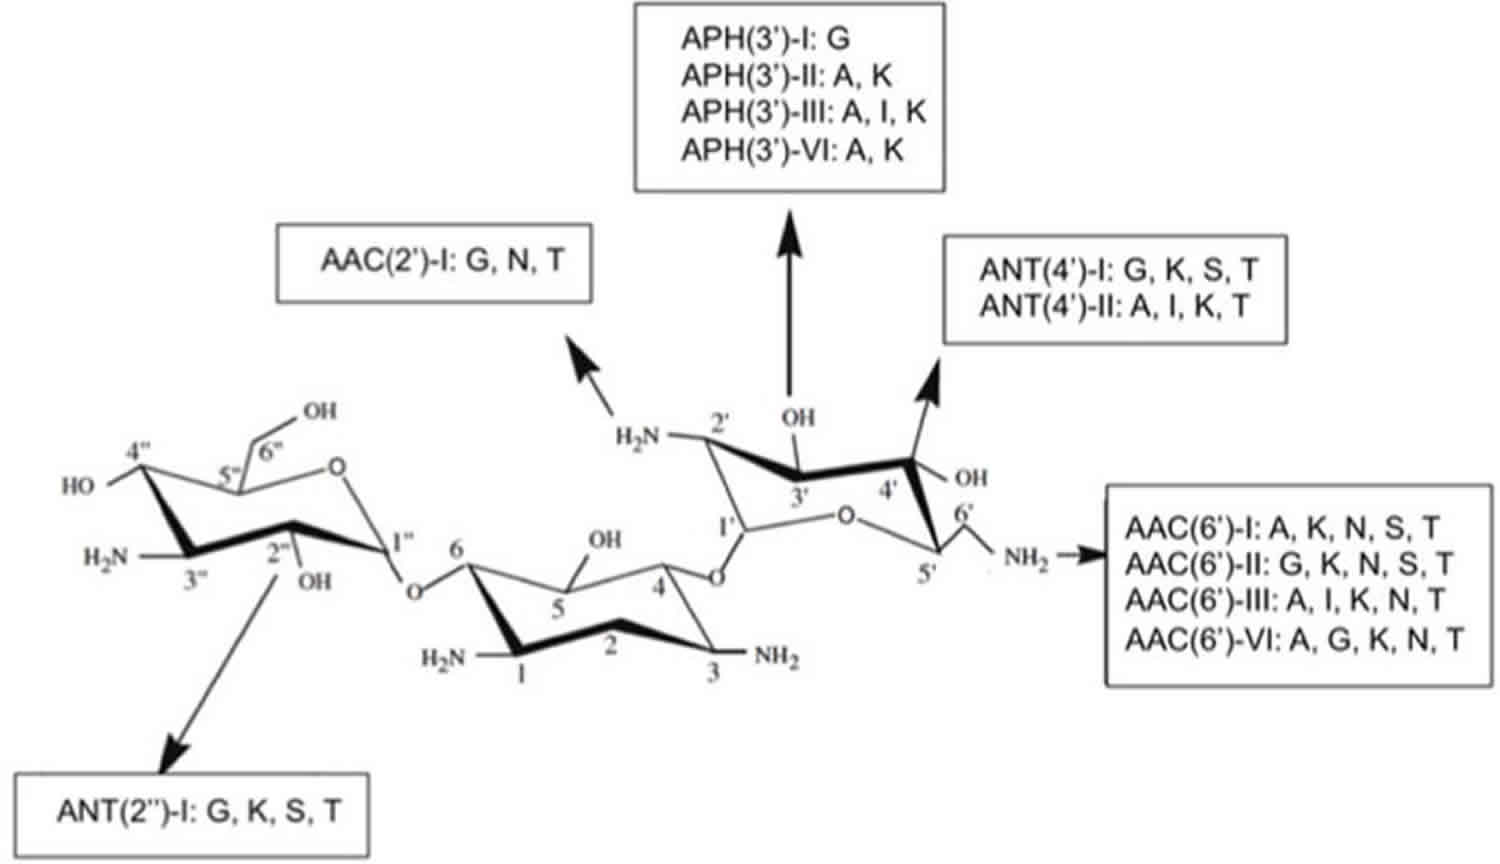 Antibiotic resistance mechanism - chemical alterations of the antibiotic